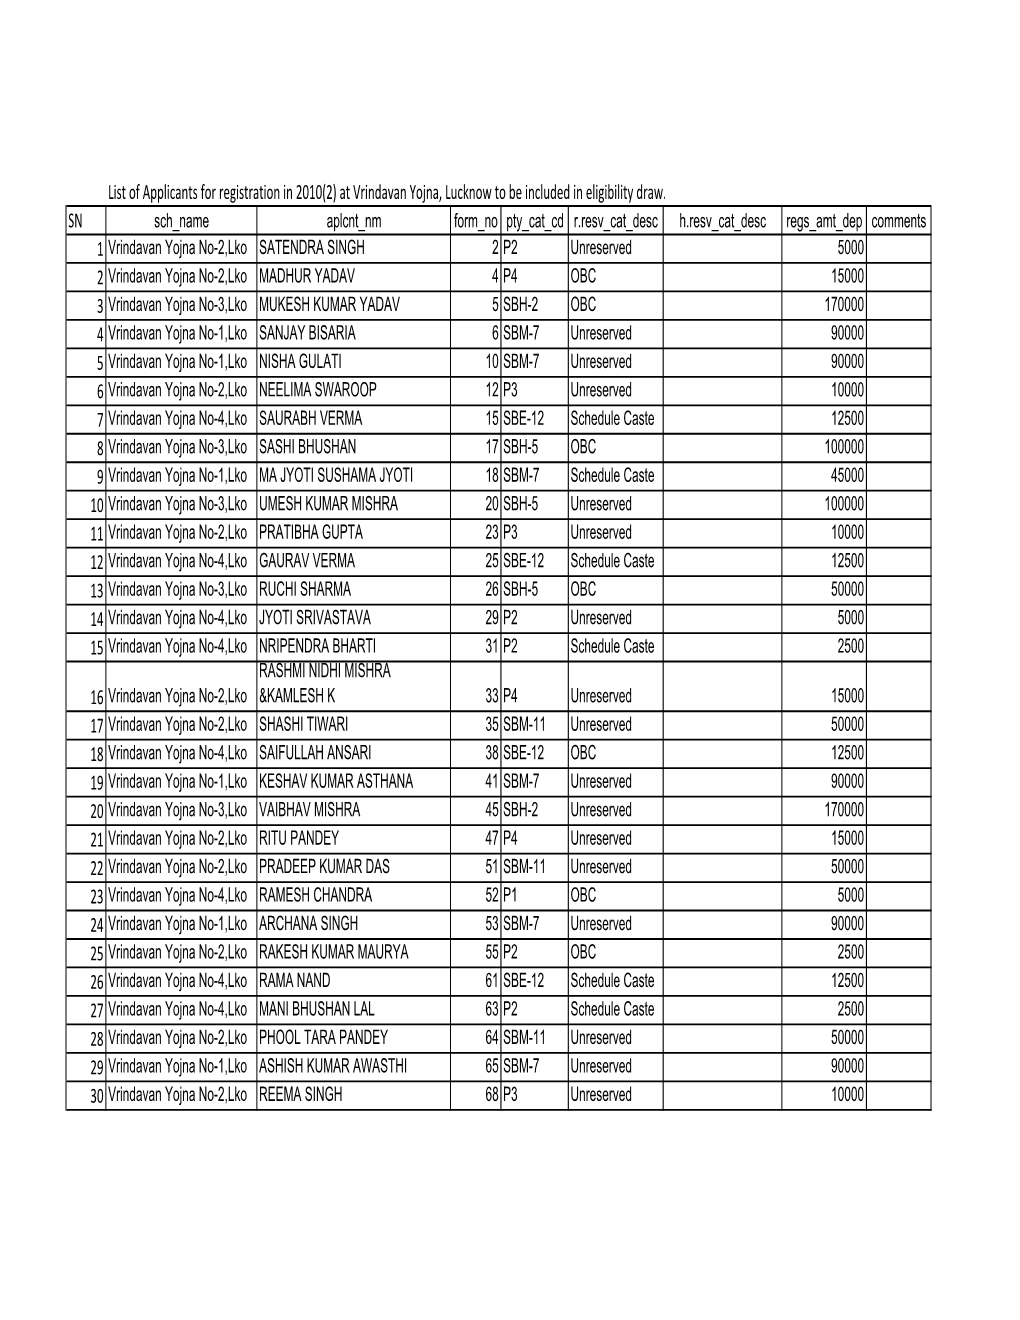 List of Applicants for Registration in 2010(2) at Vrindavan Yojna, Lucknow to Be Included in Eligibility Draw. S